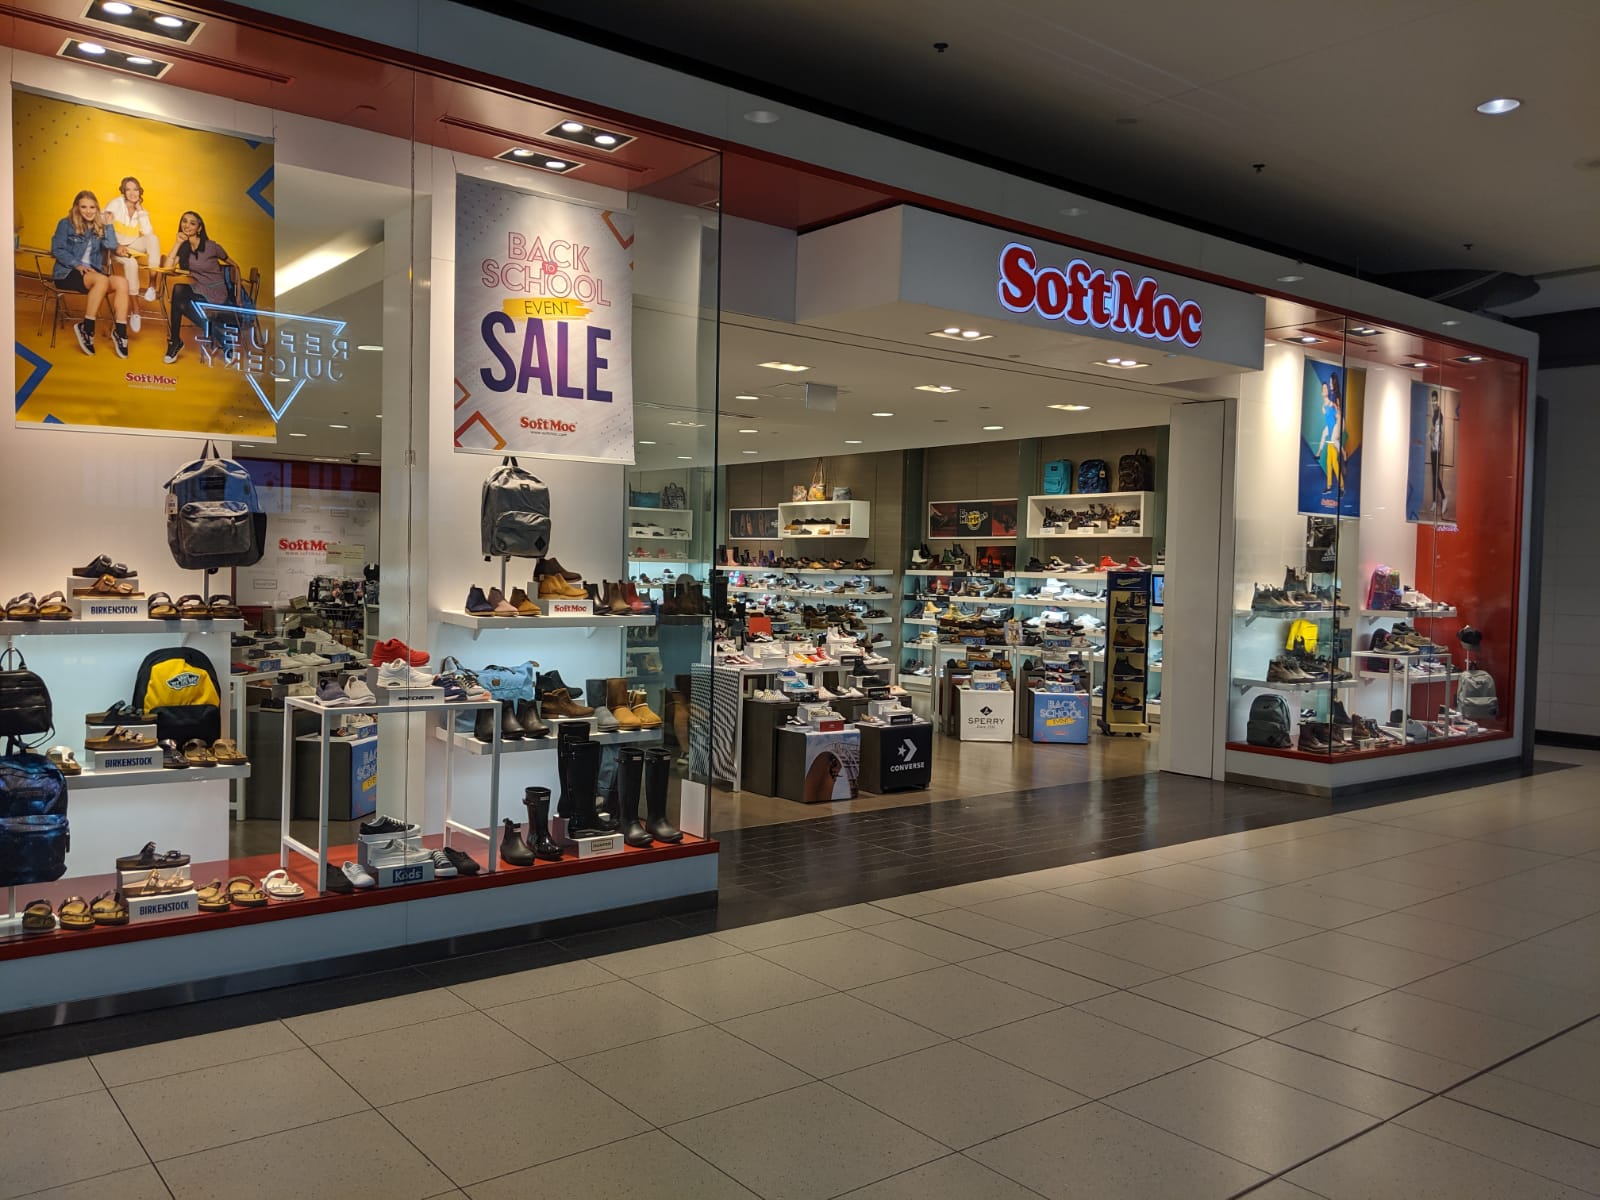 clarks shoes outlet stores locations toronto